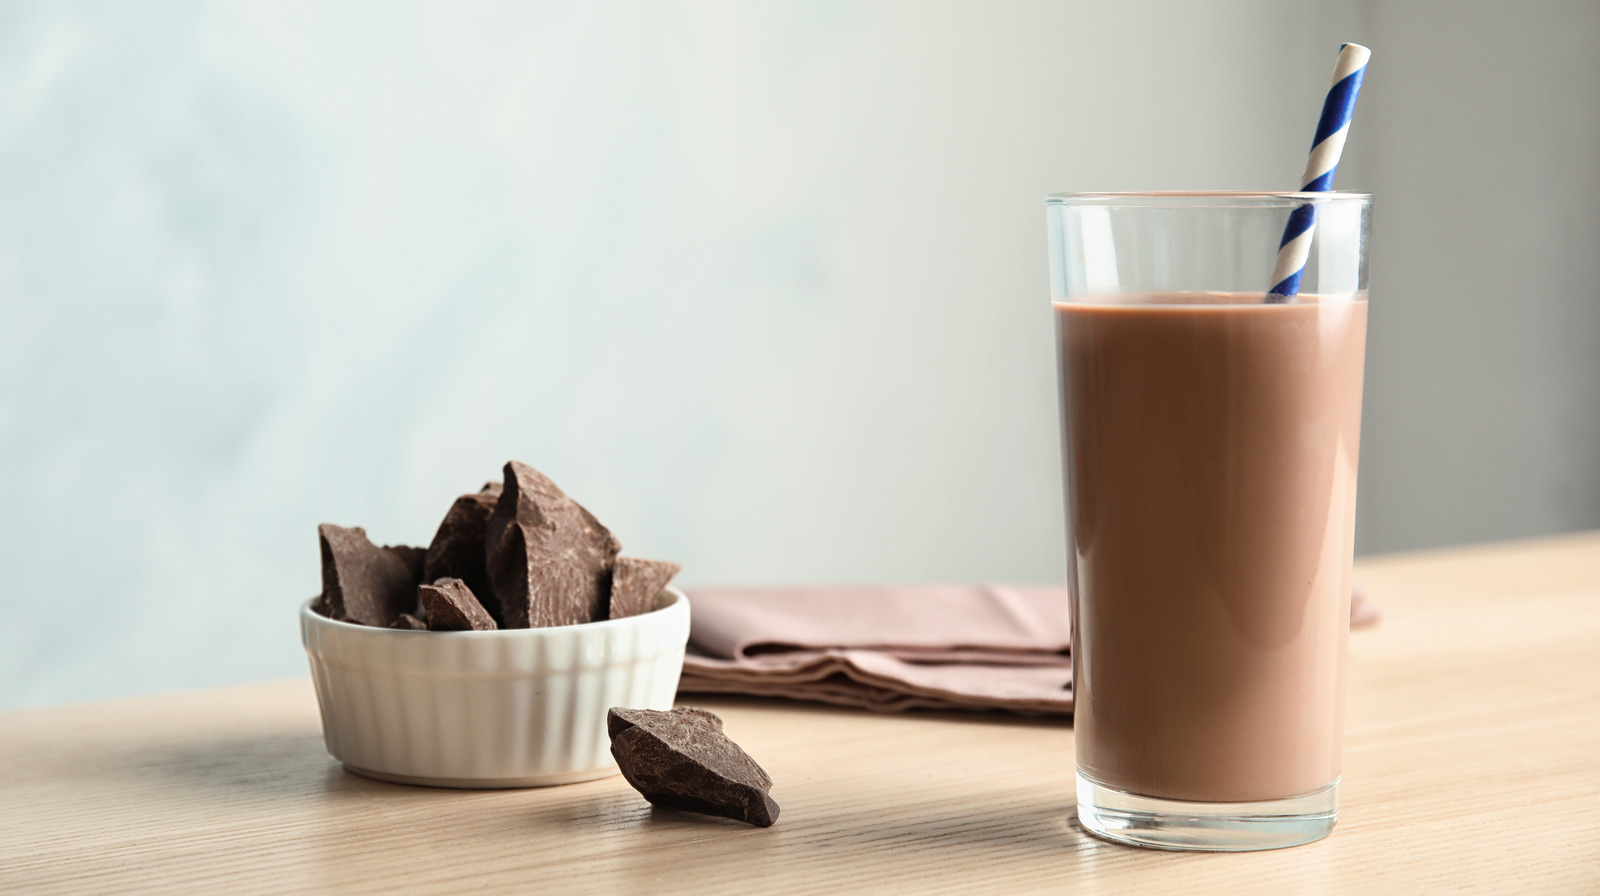 Chocolate Milk Brands Ranked From Worst To Best